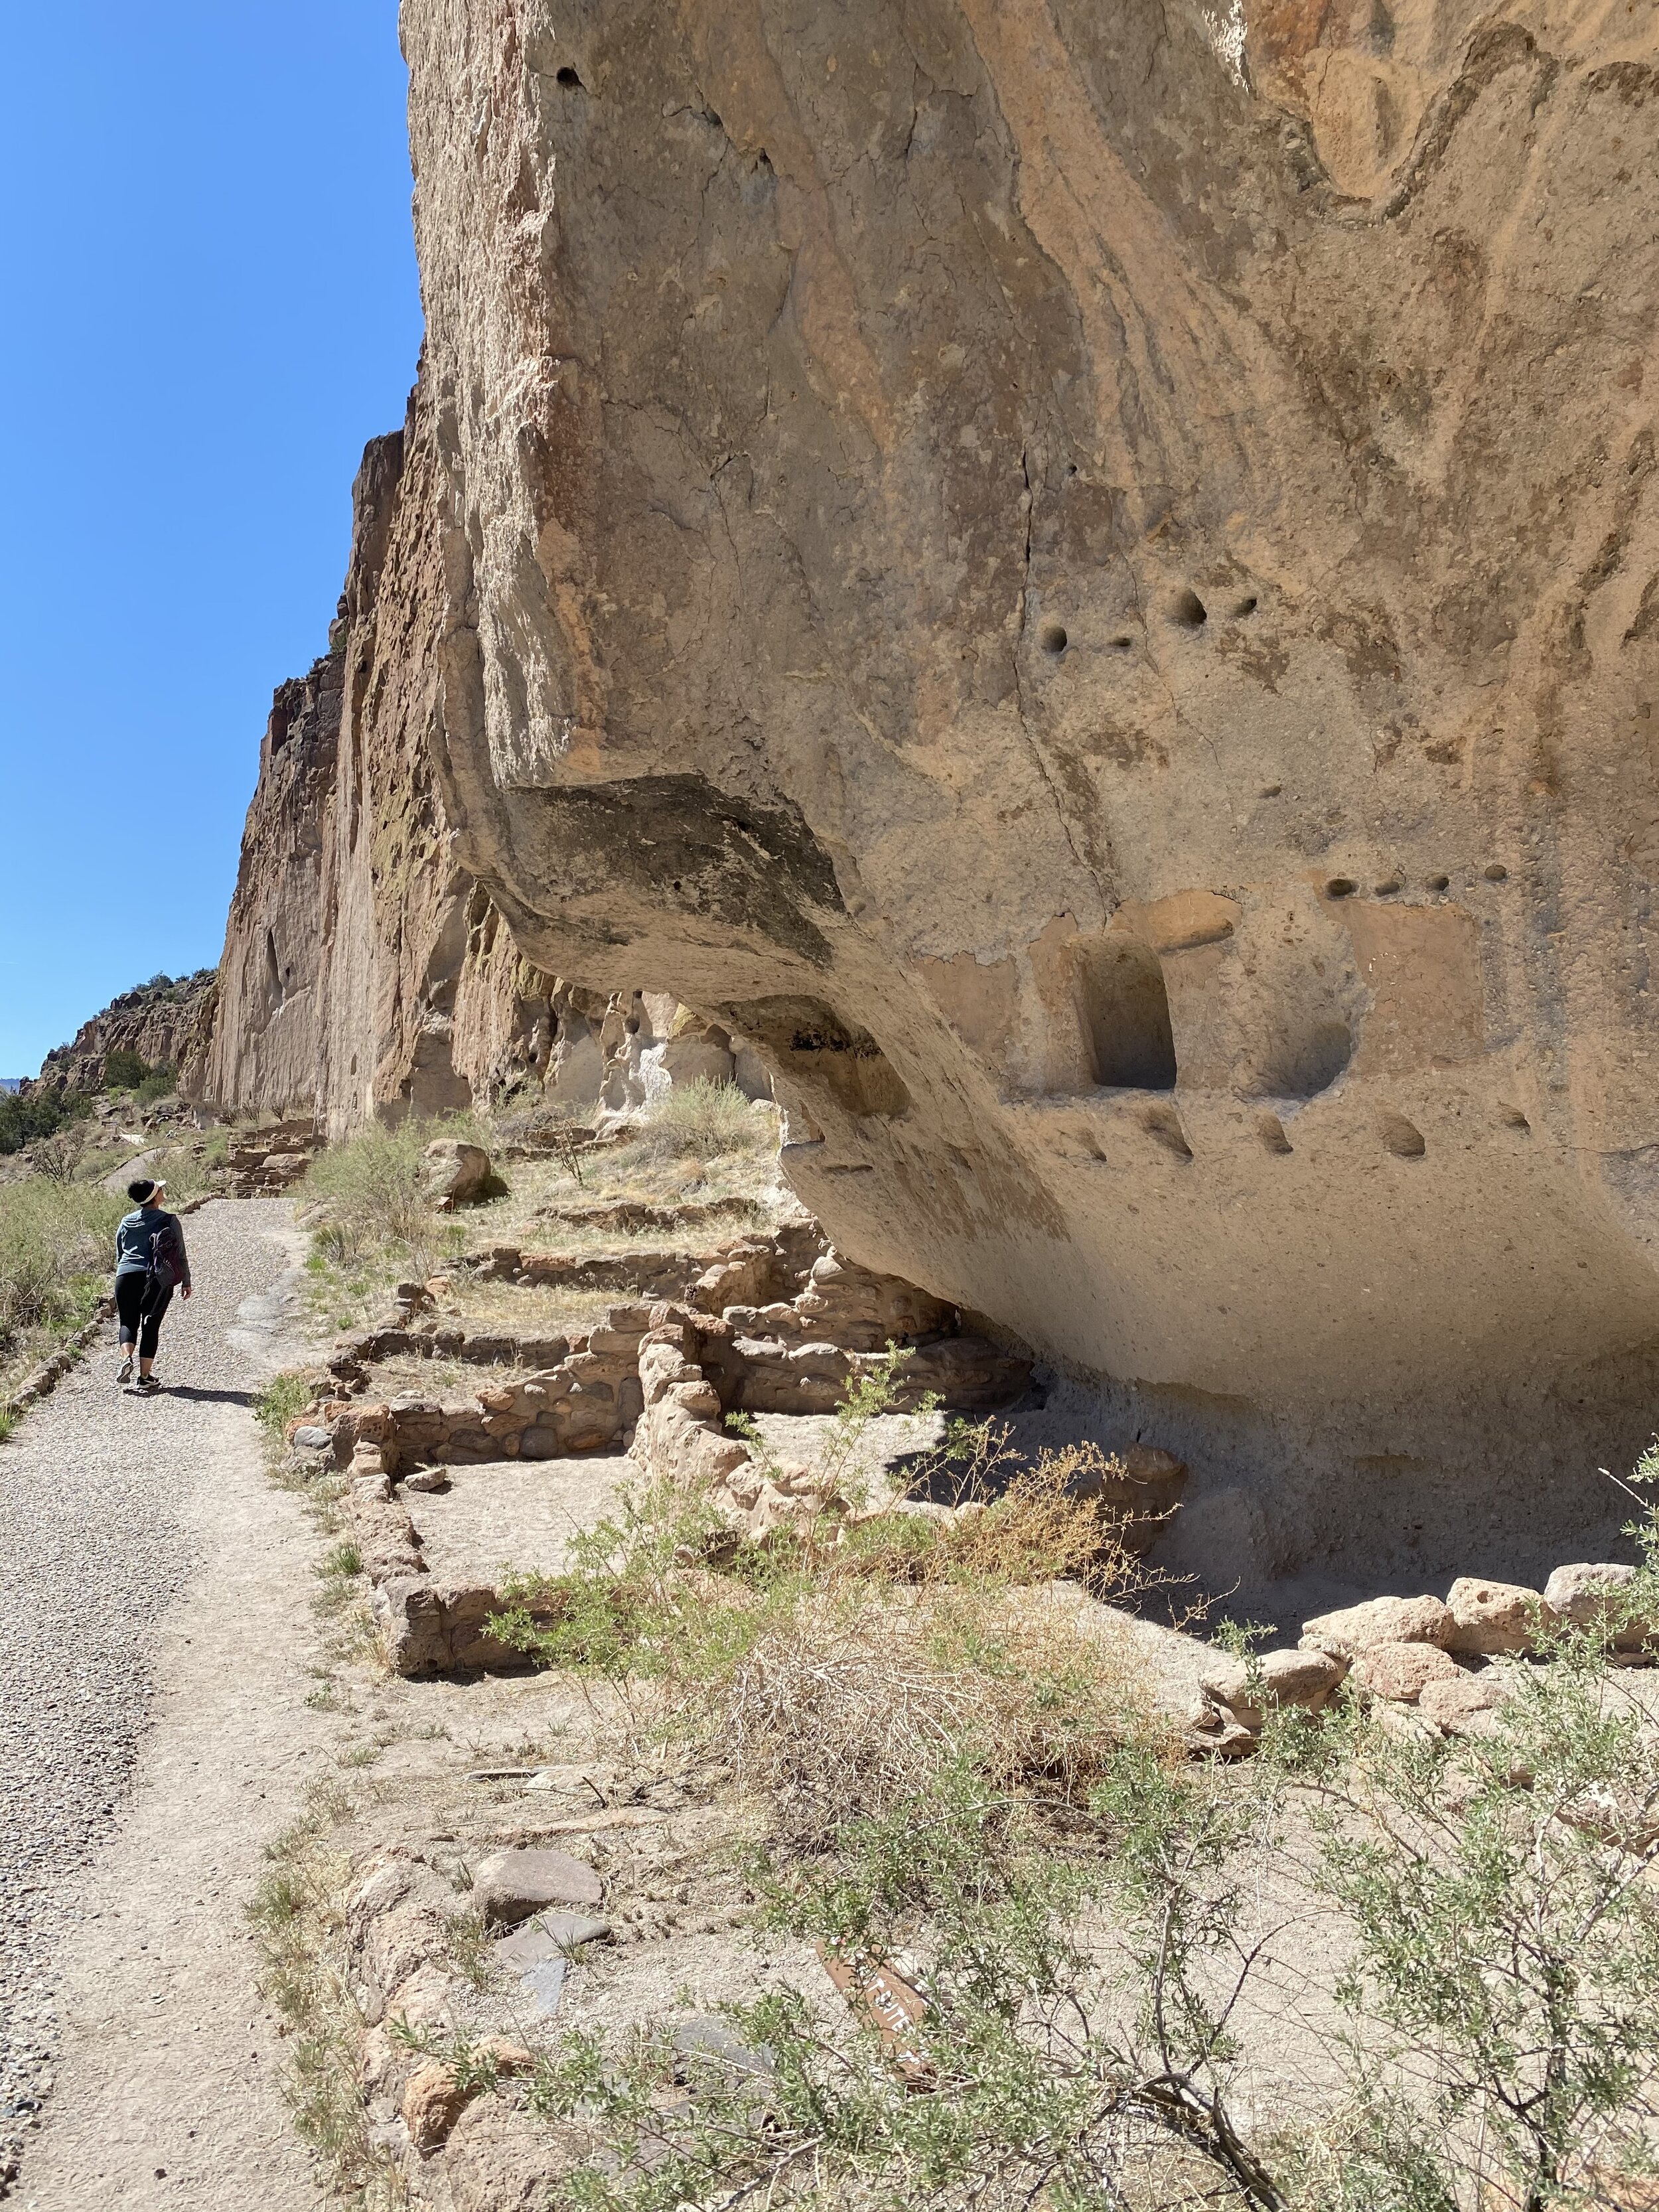 Cliff dwellings and stone ruins at Bandelier National Monument